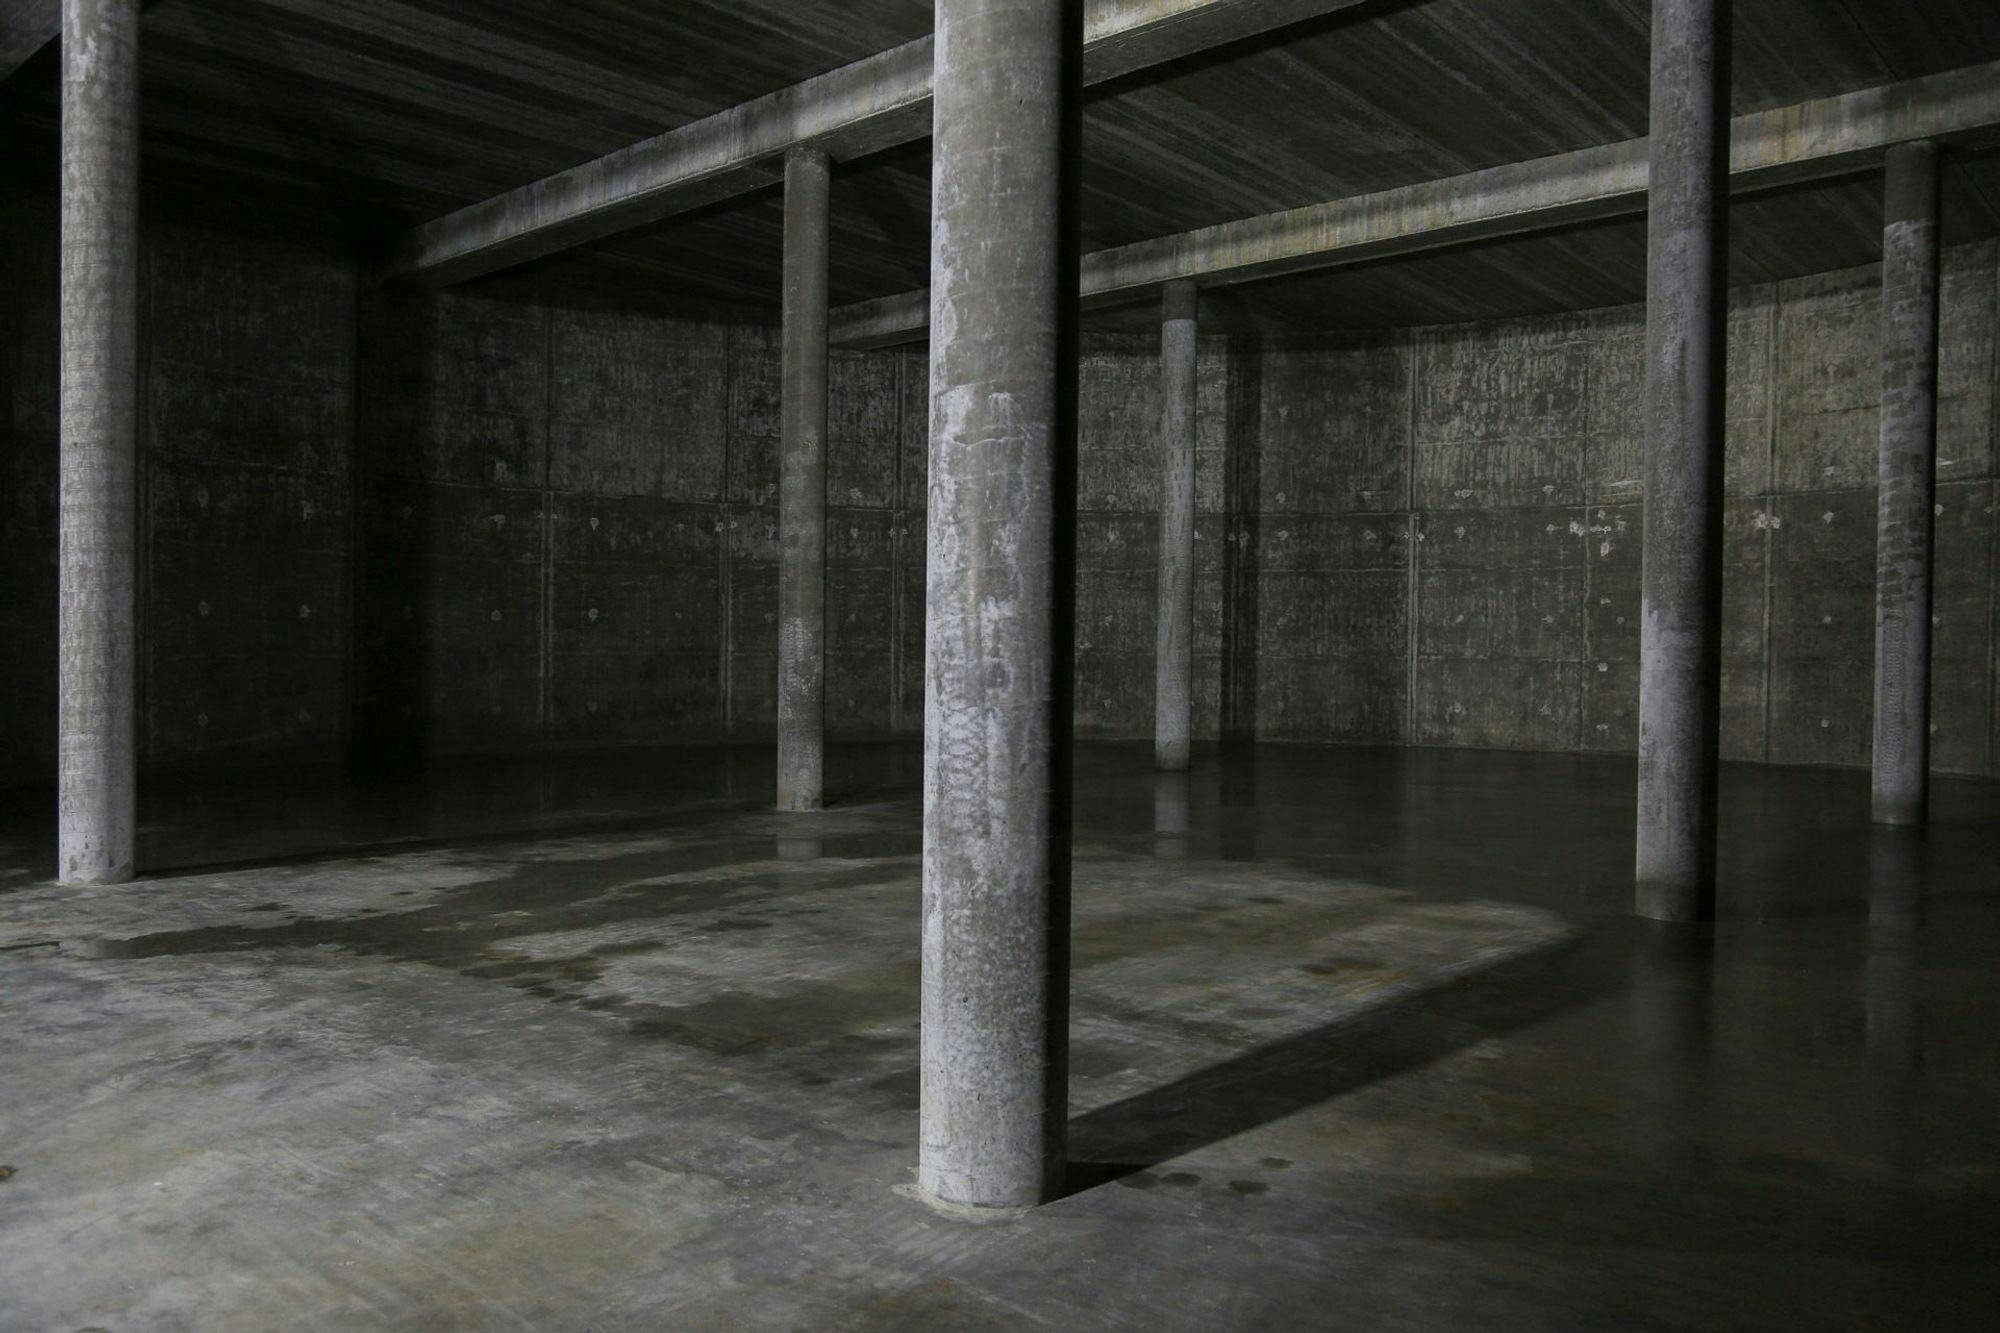 A dimly lit concrete space with pillars